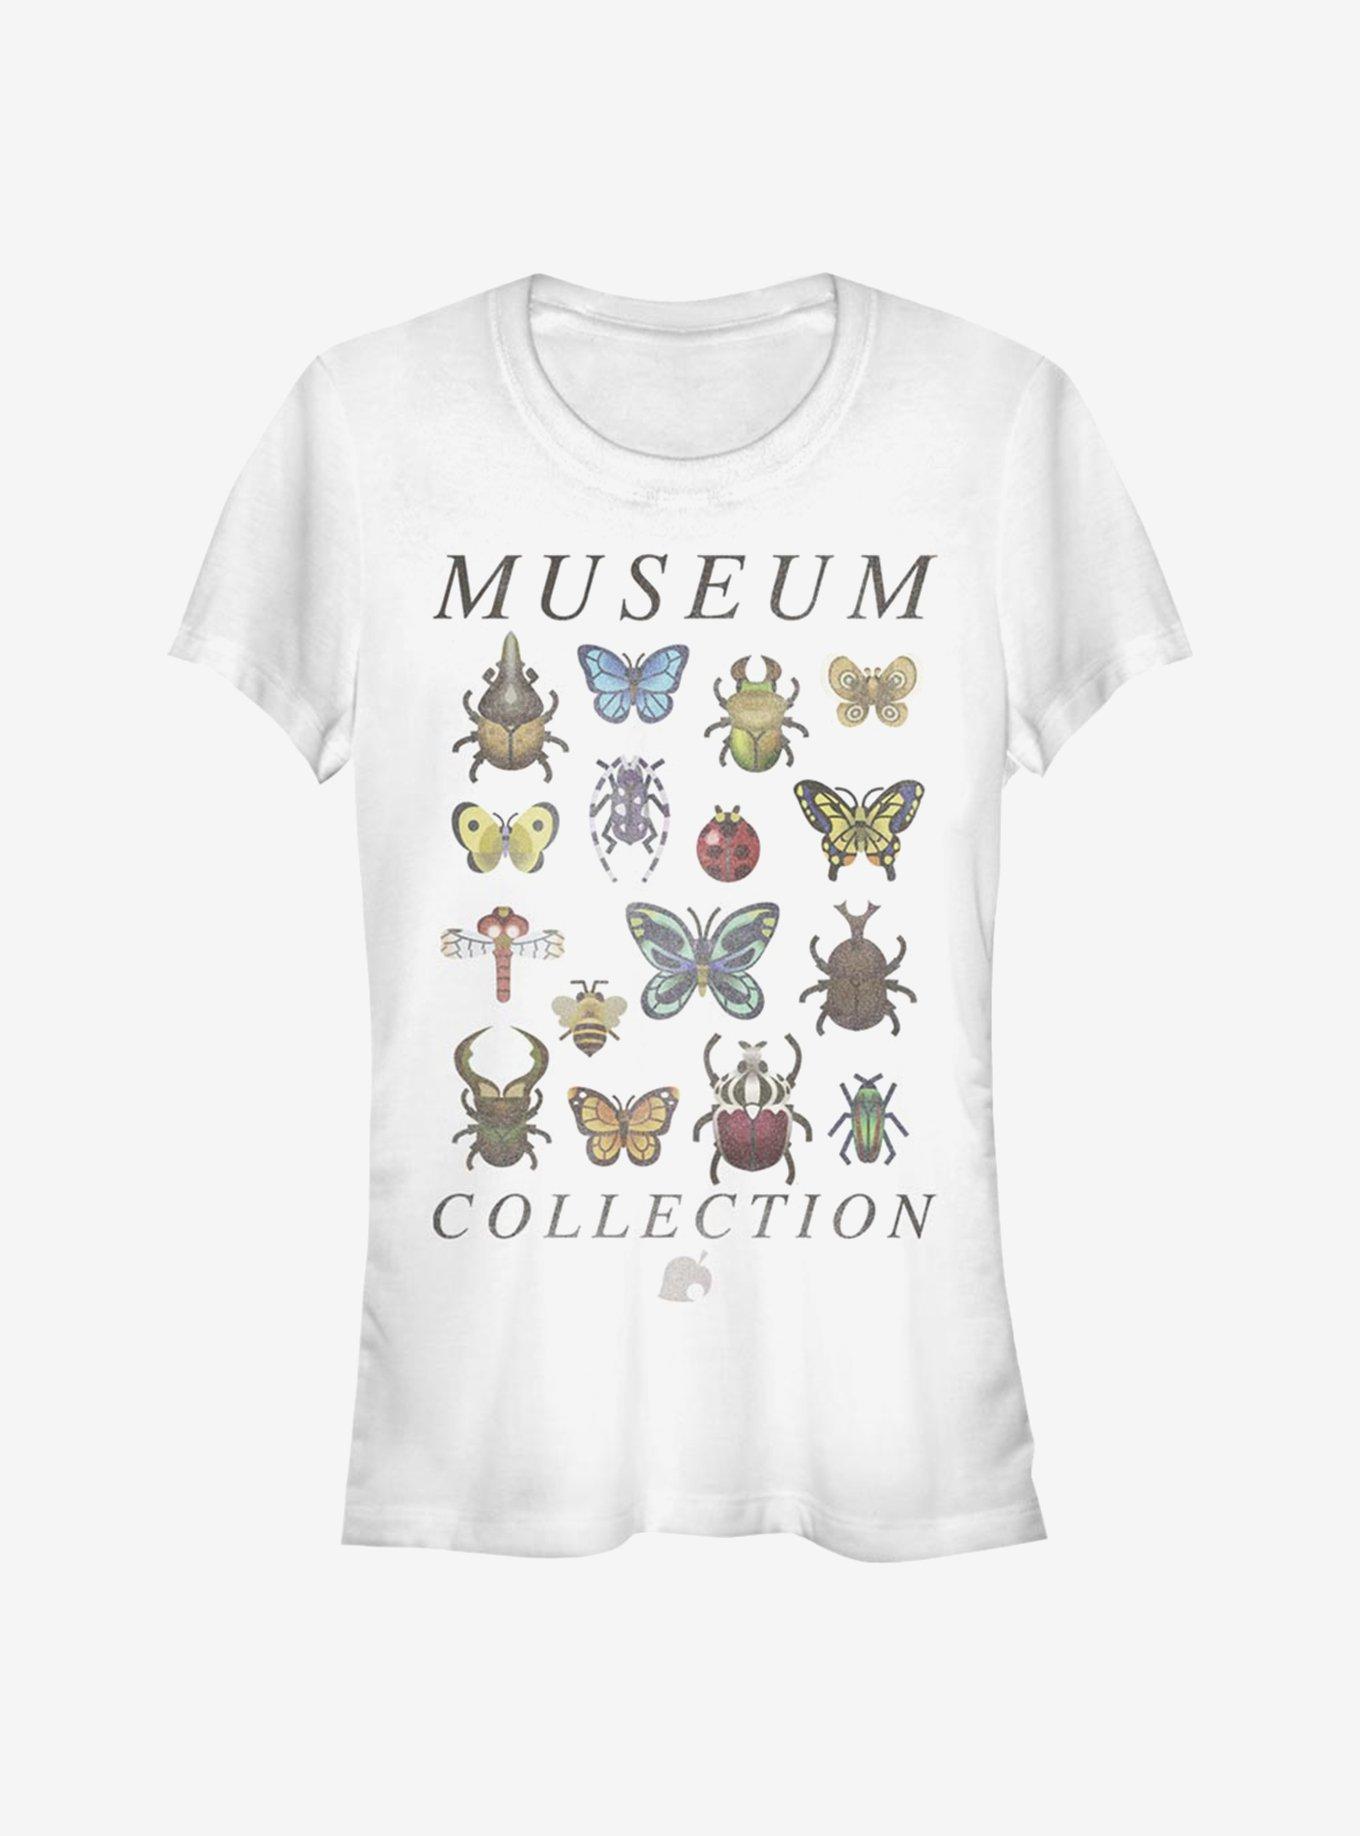 Animal Crossing Bug Collection Girls T-Shirt, WHITE, hi-res